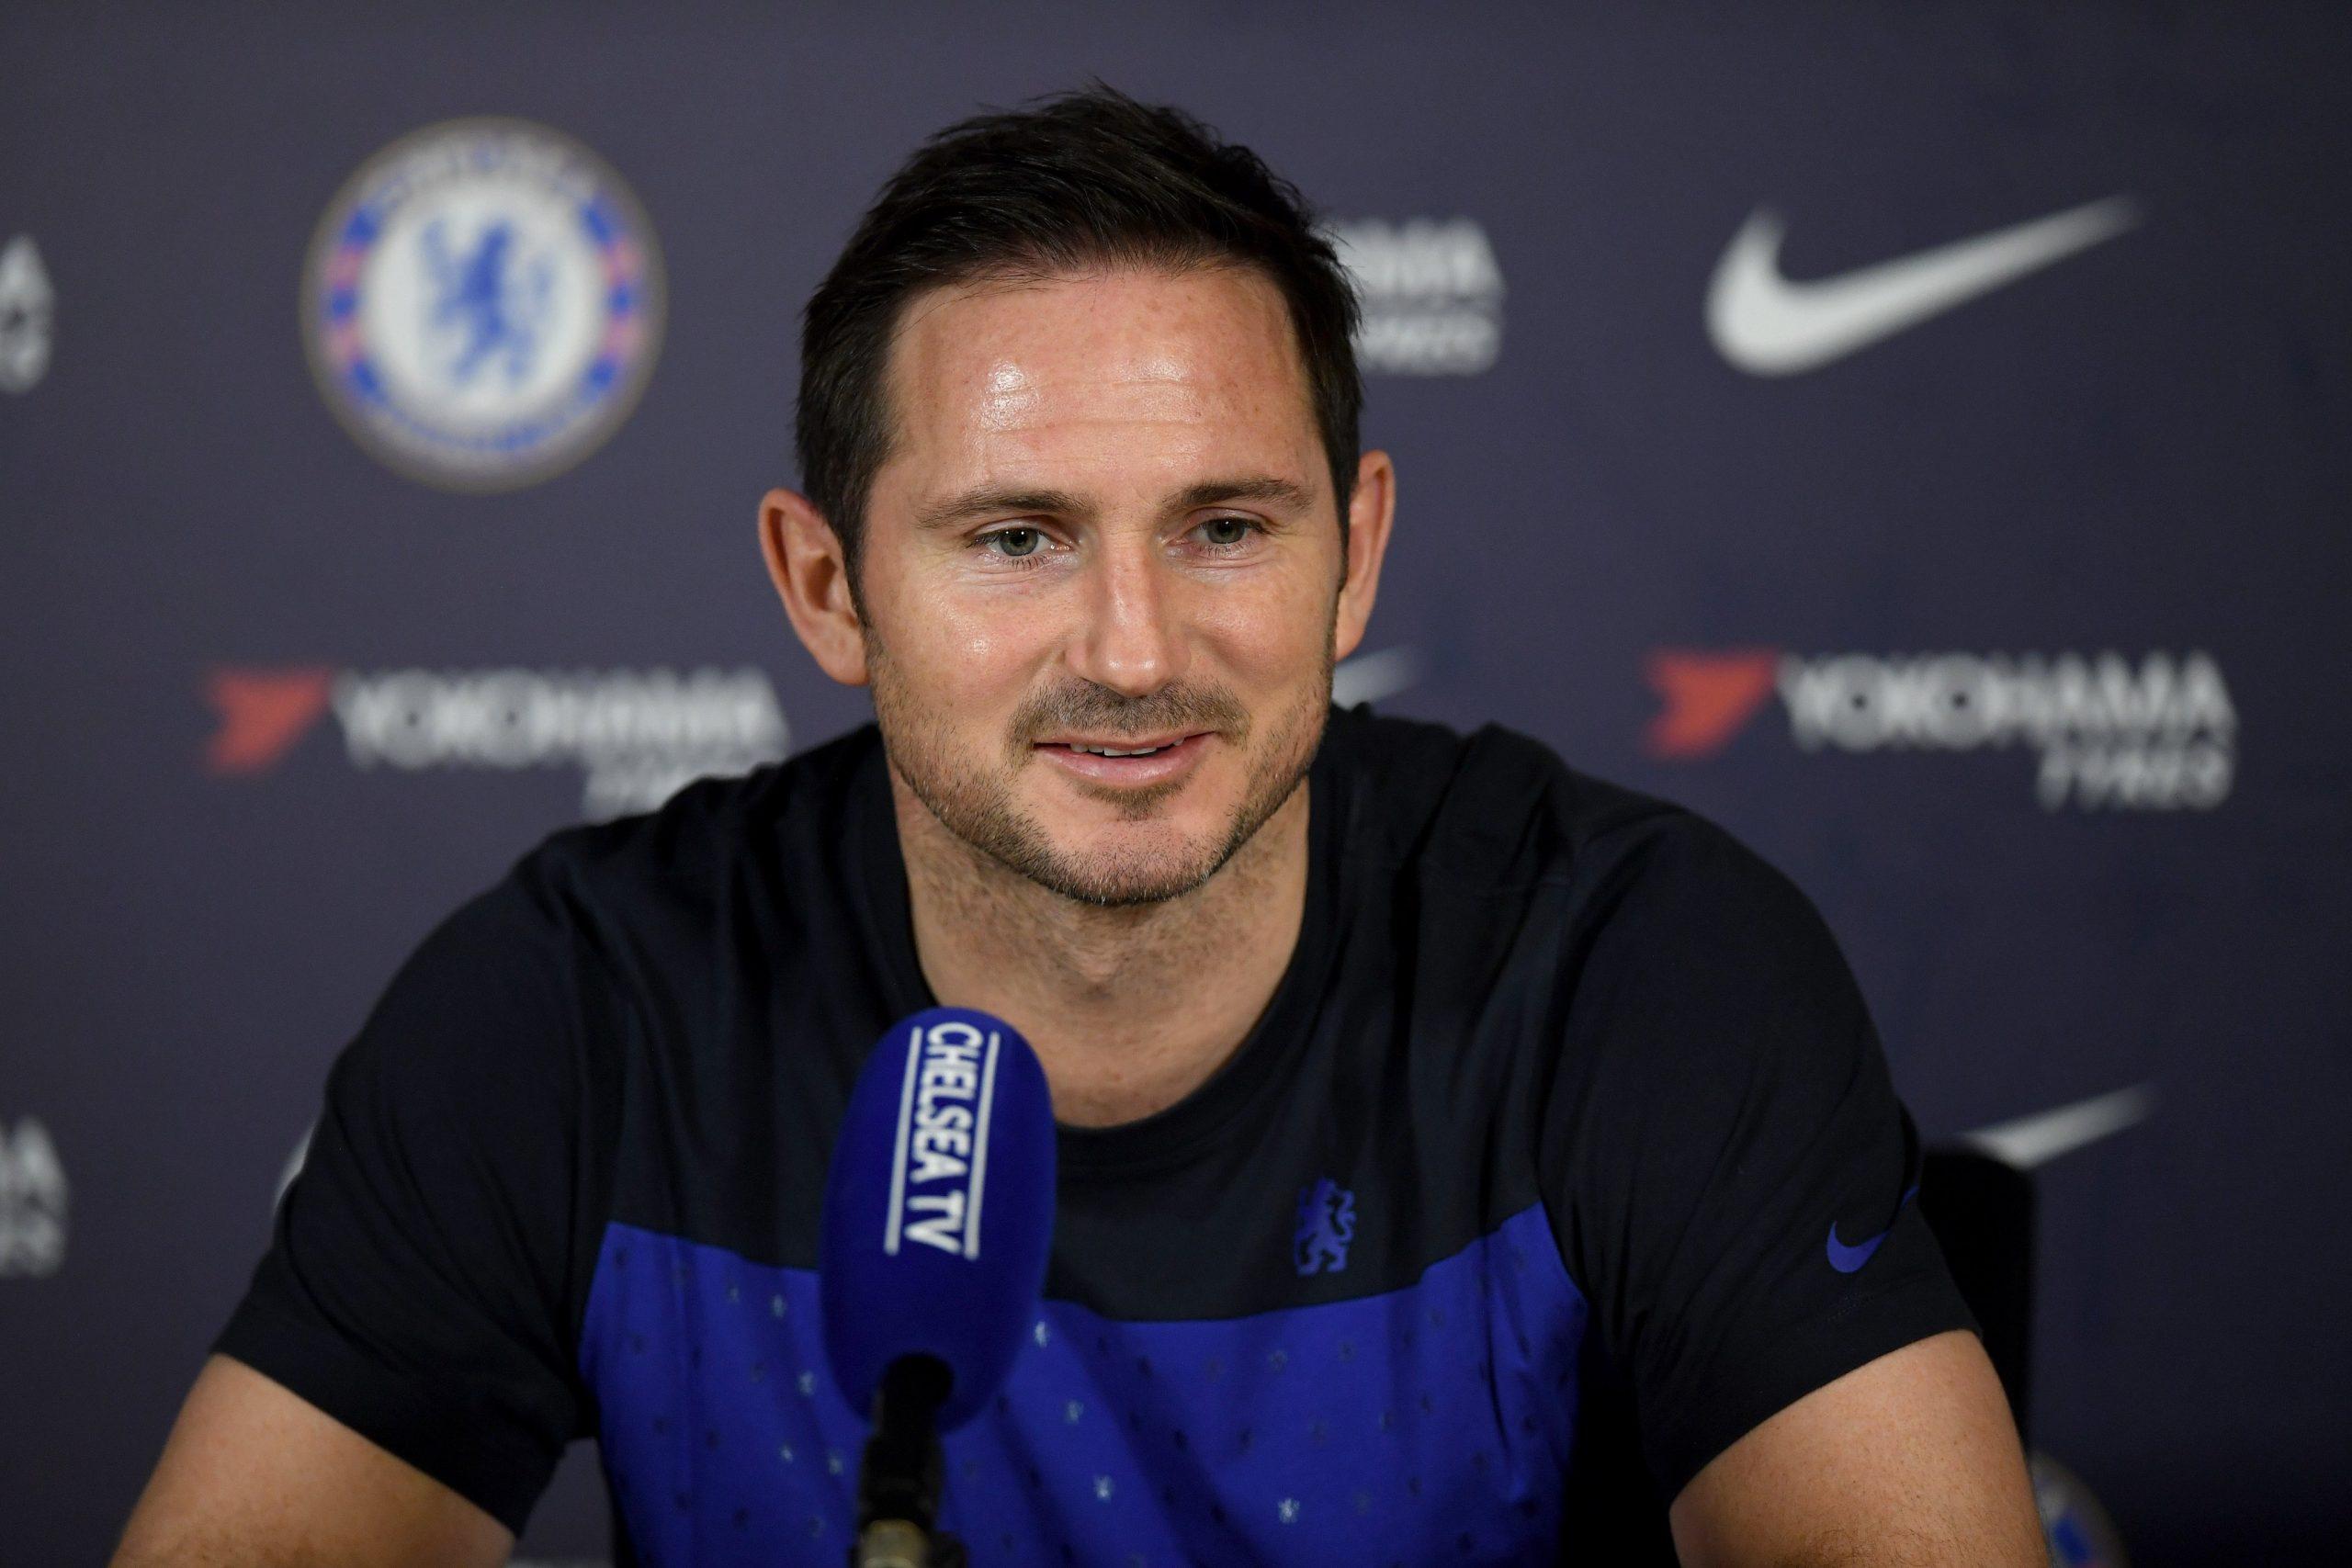 Lampard refused to lead Crystal Palace